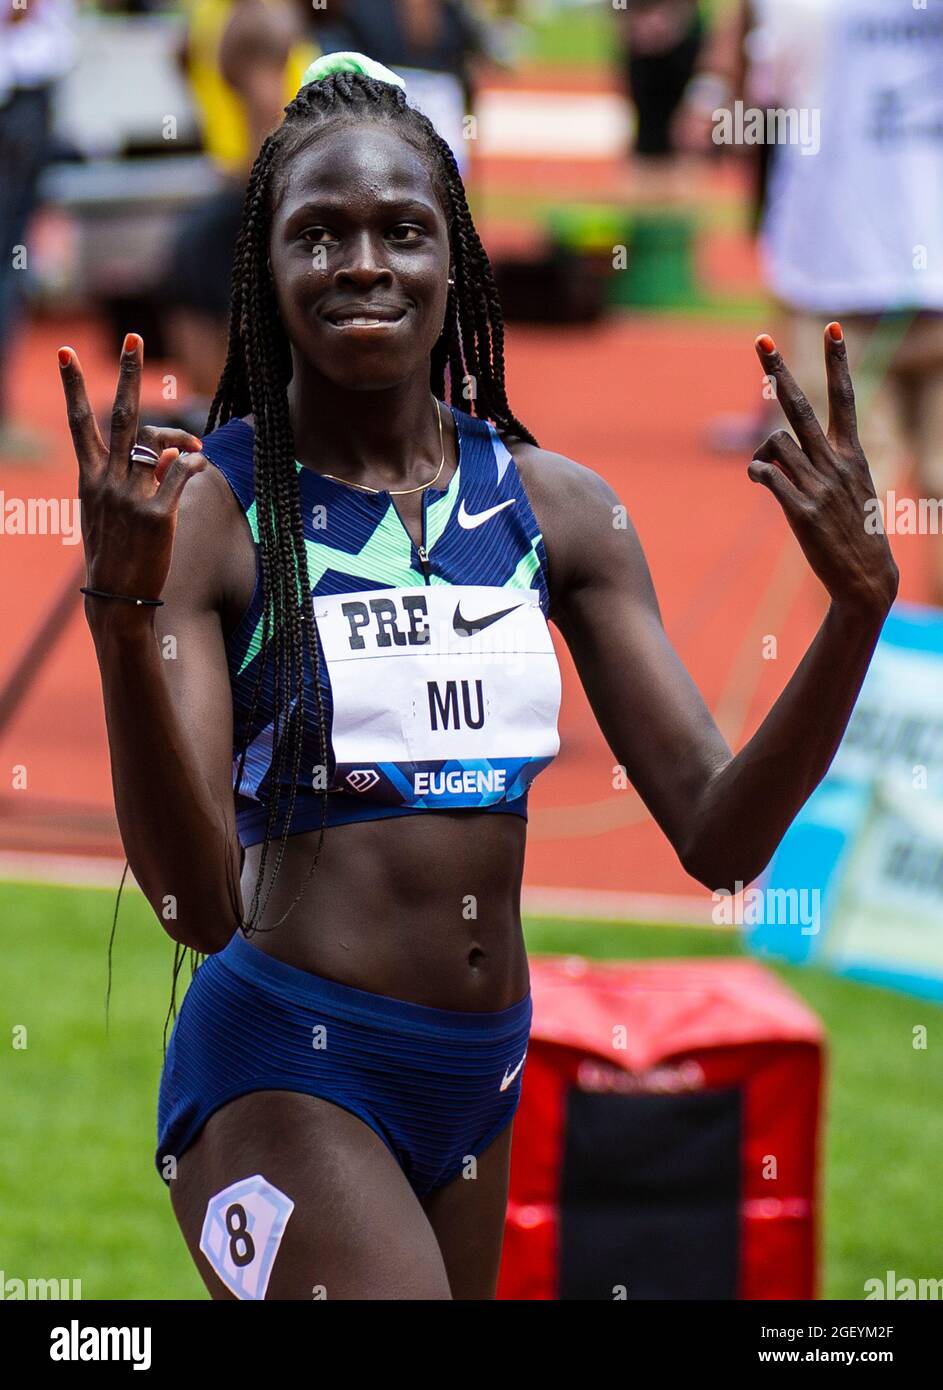 August 21, 2021 Eugene OR USA: Athing MU wins the womens 800